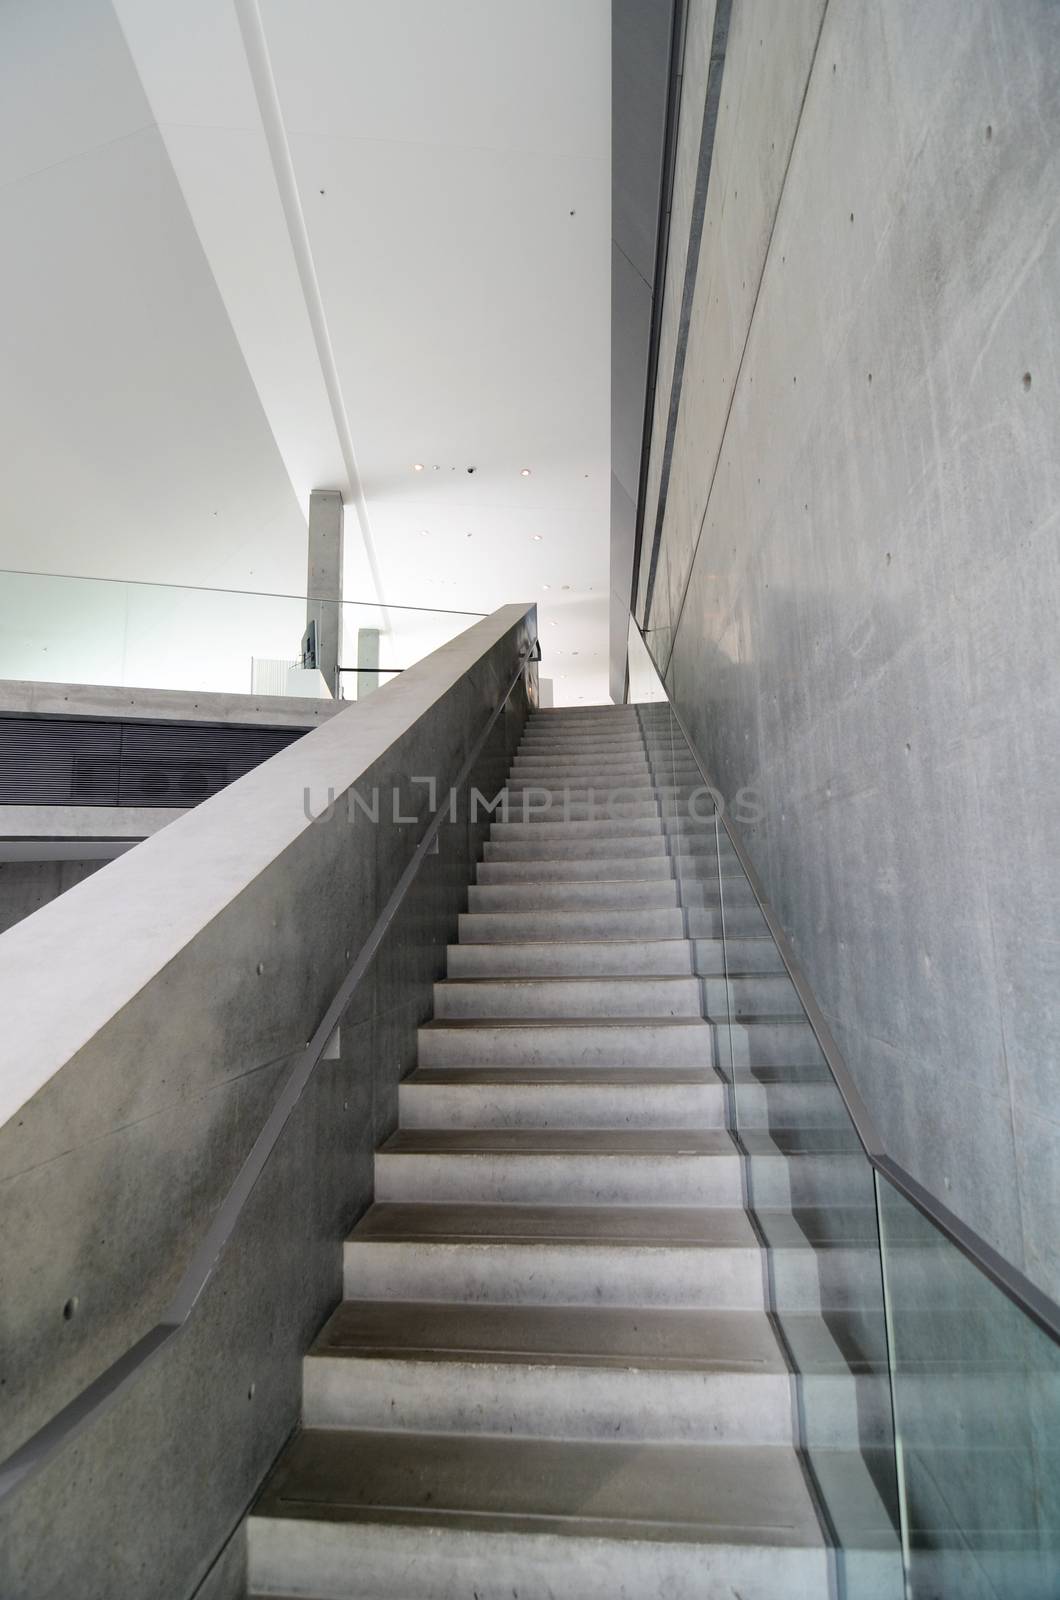 Bare concrete staircase in a modern building